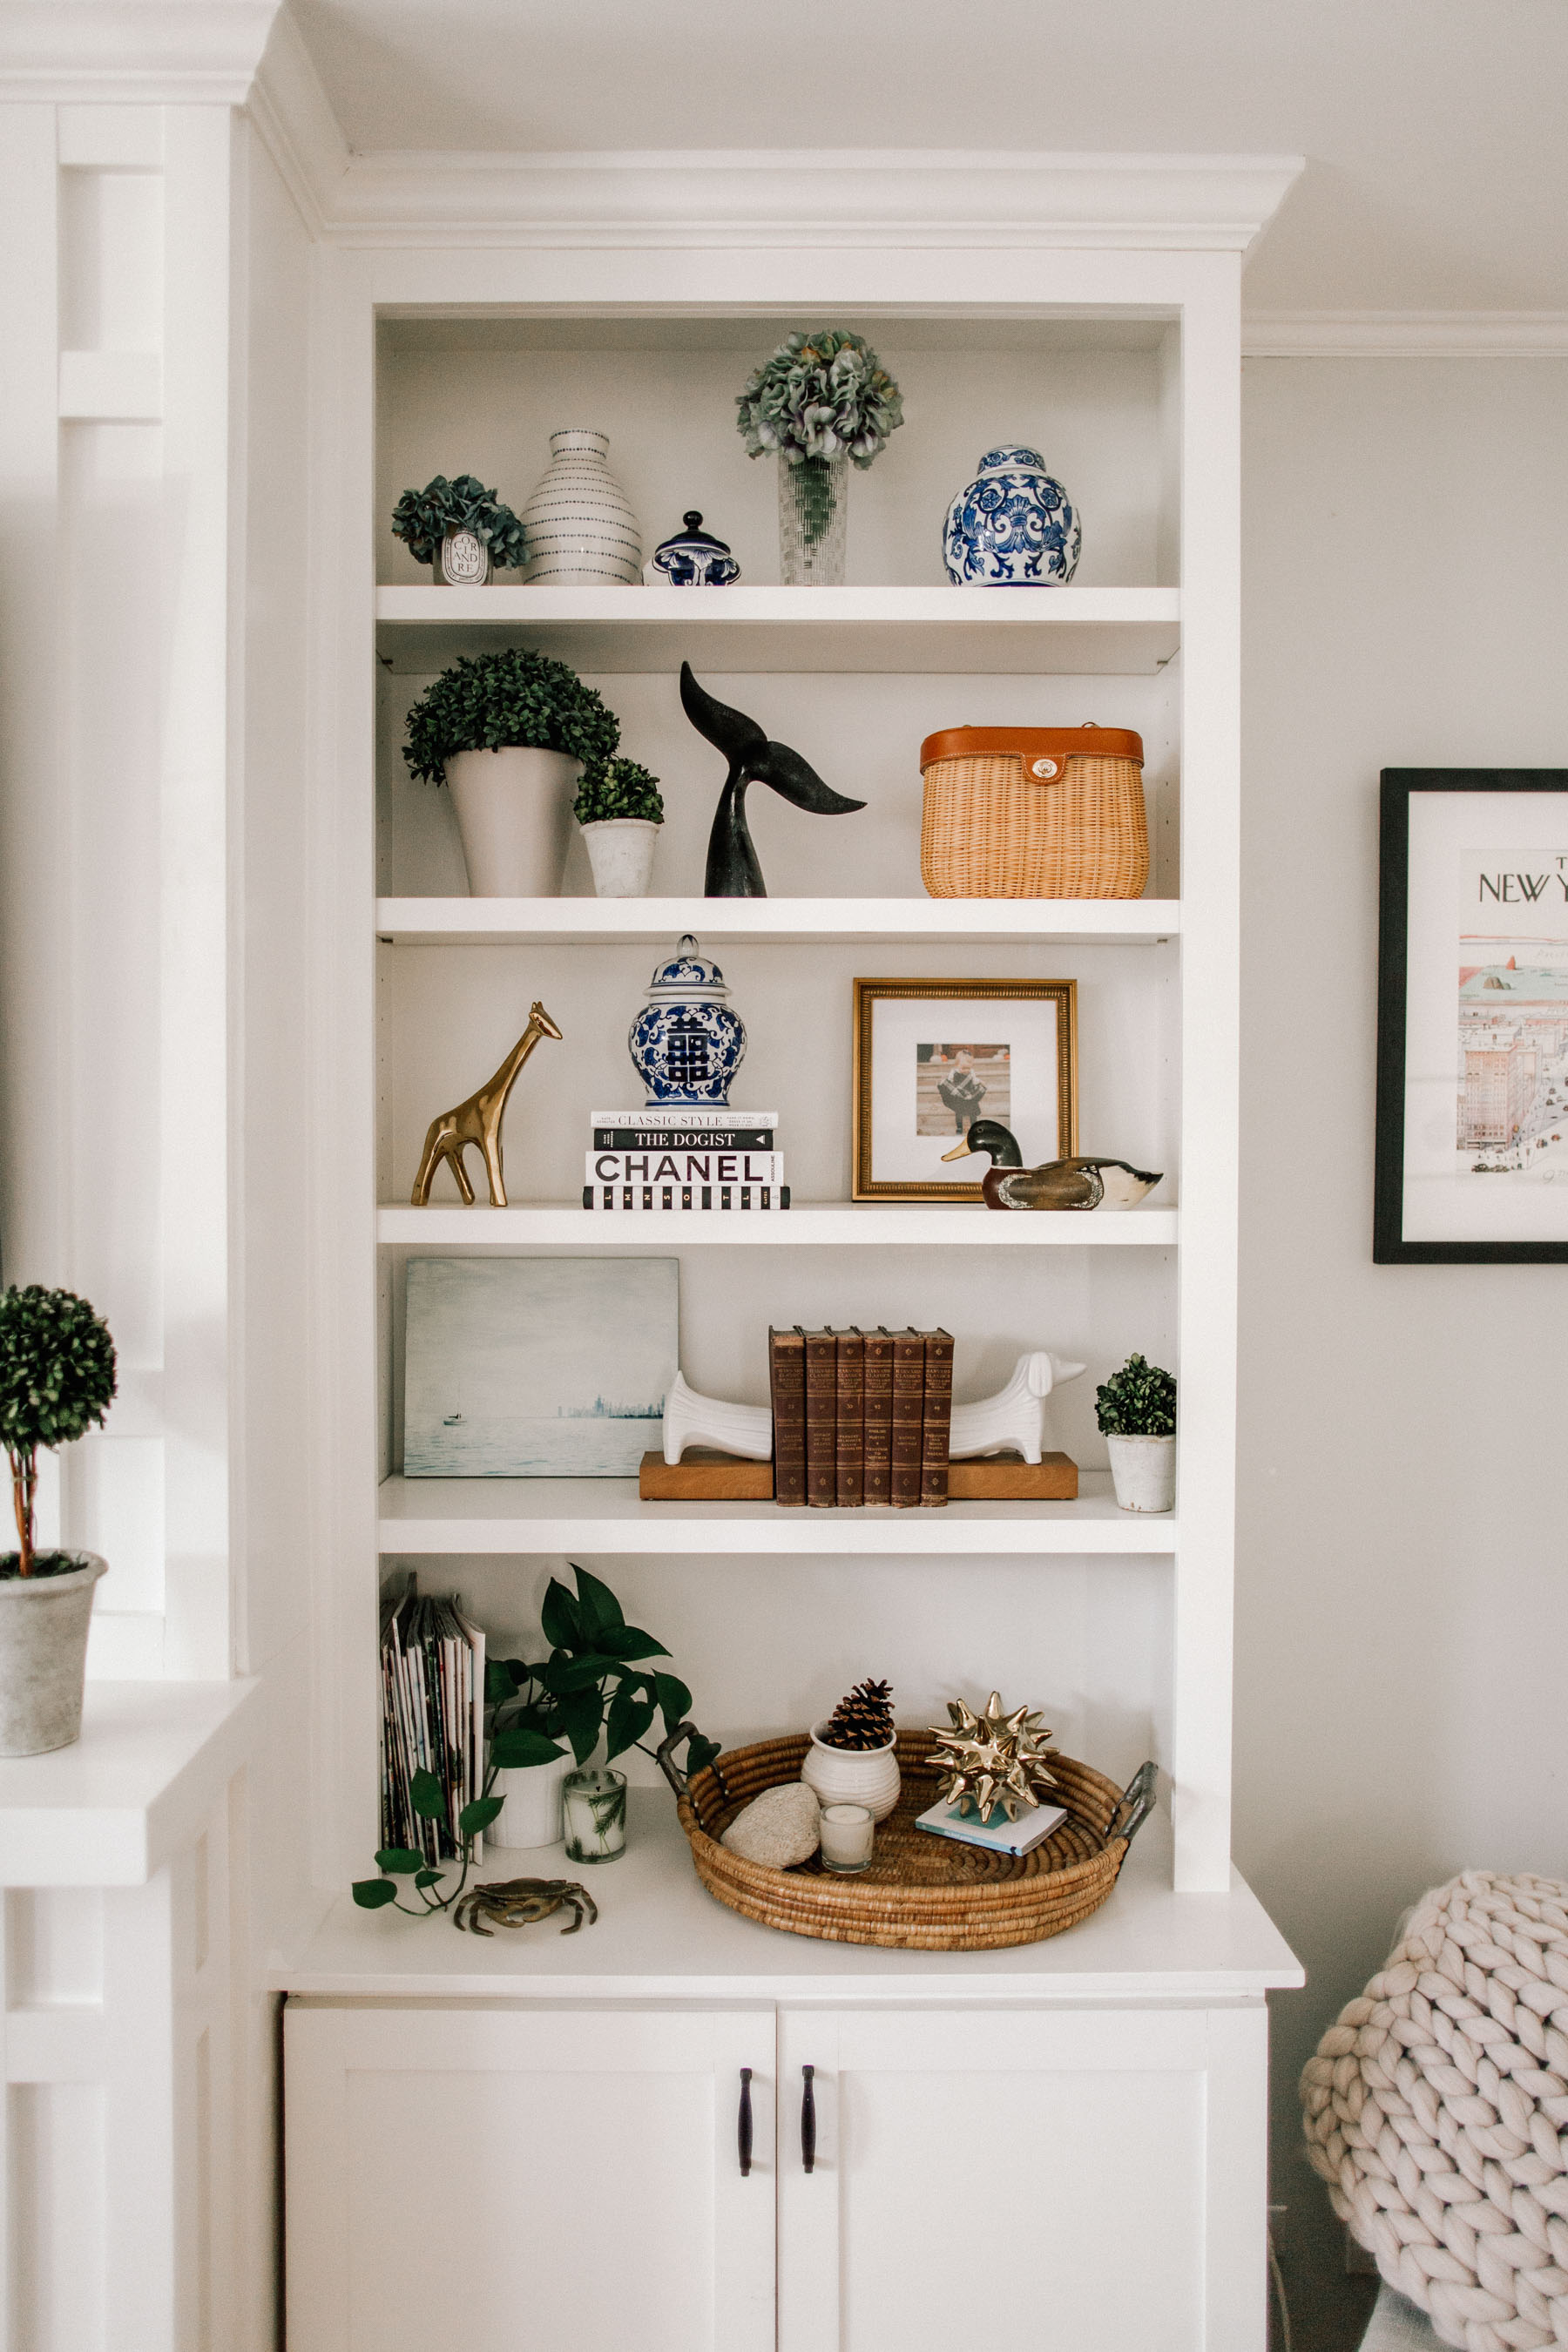 How to Decorate Preppy Bookshelves - Kelly in the City